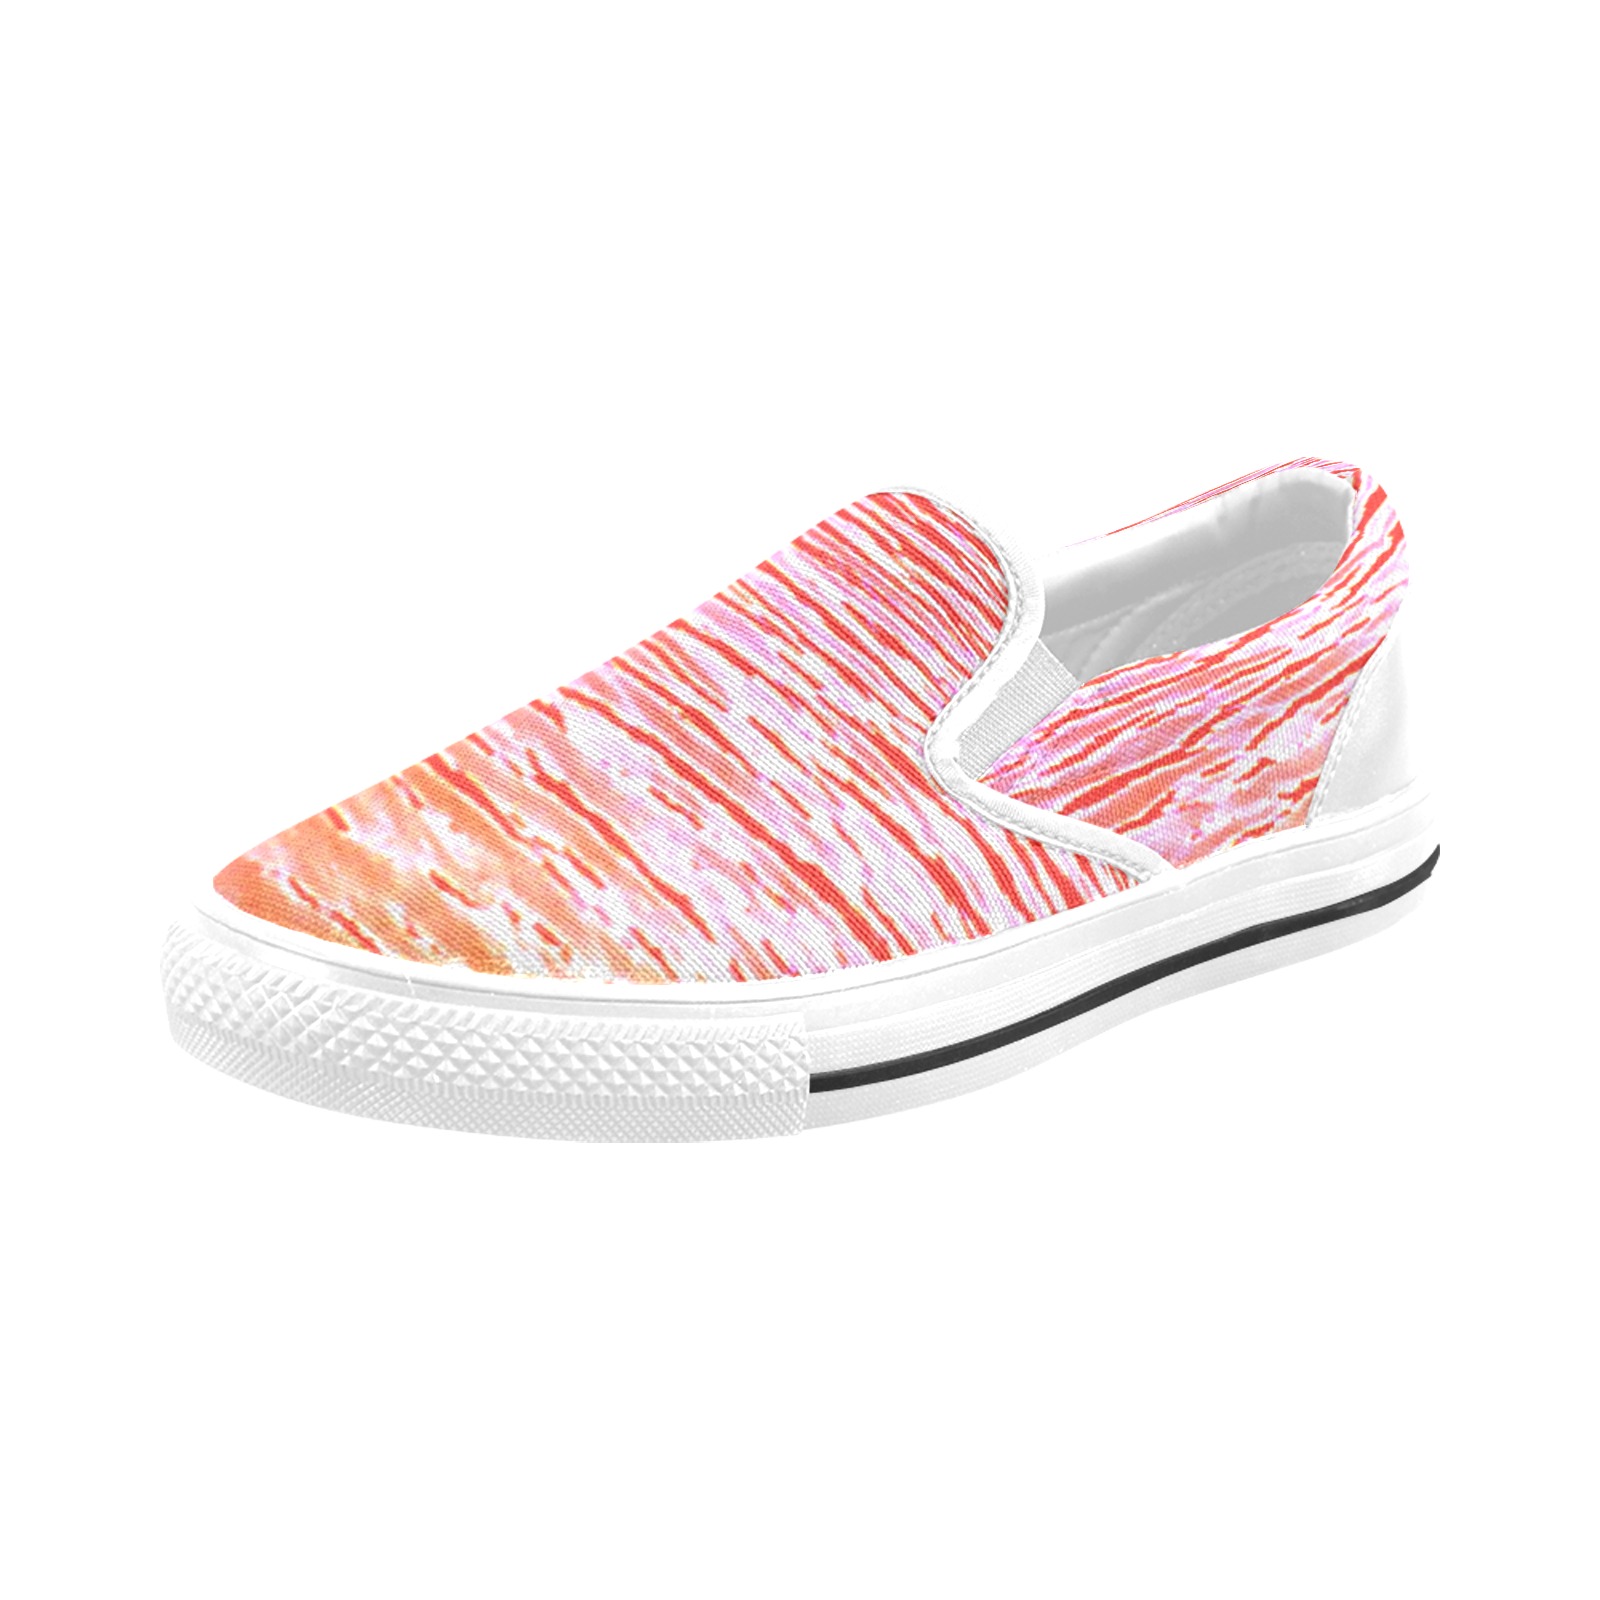 Orange and red water Men's Slip-on Canvas Shoes (Model 019)